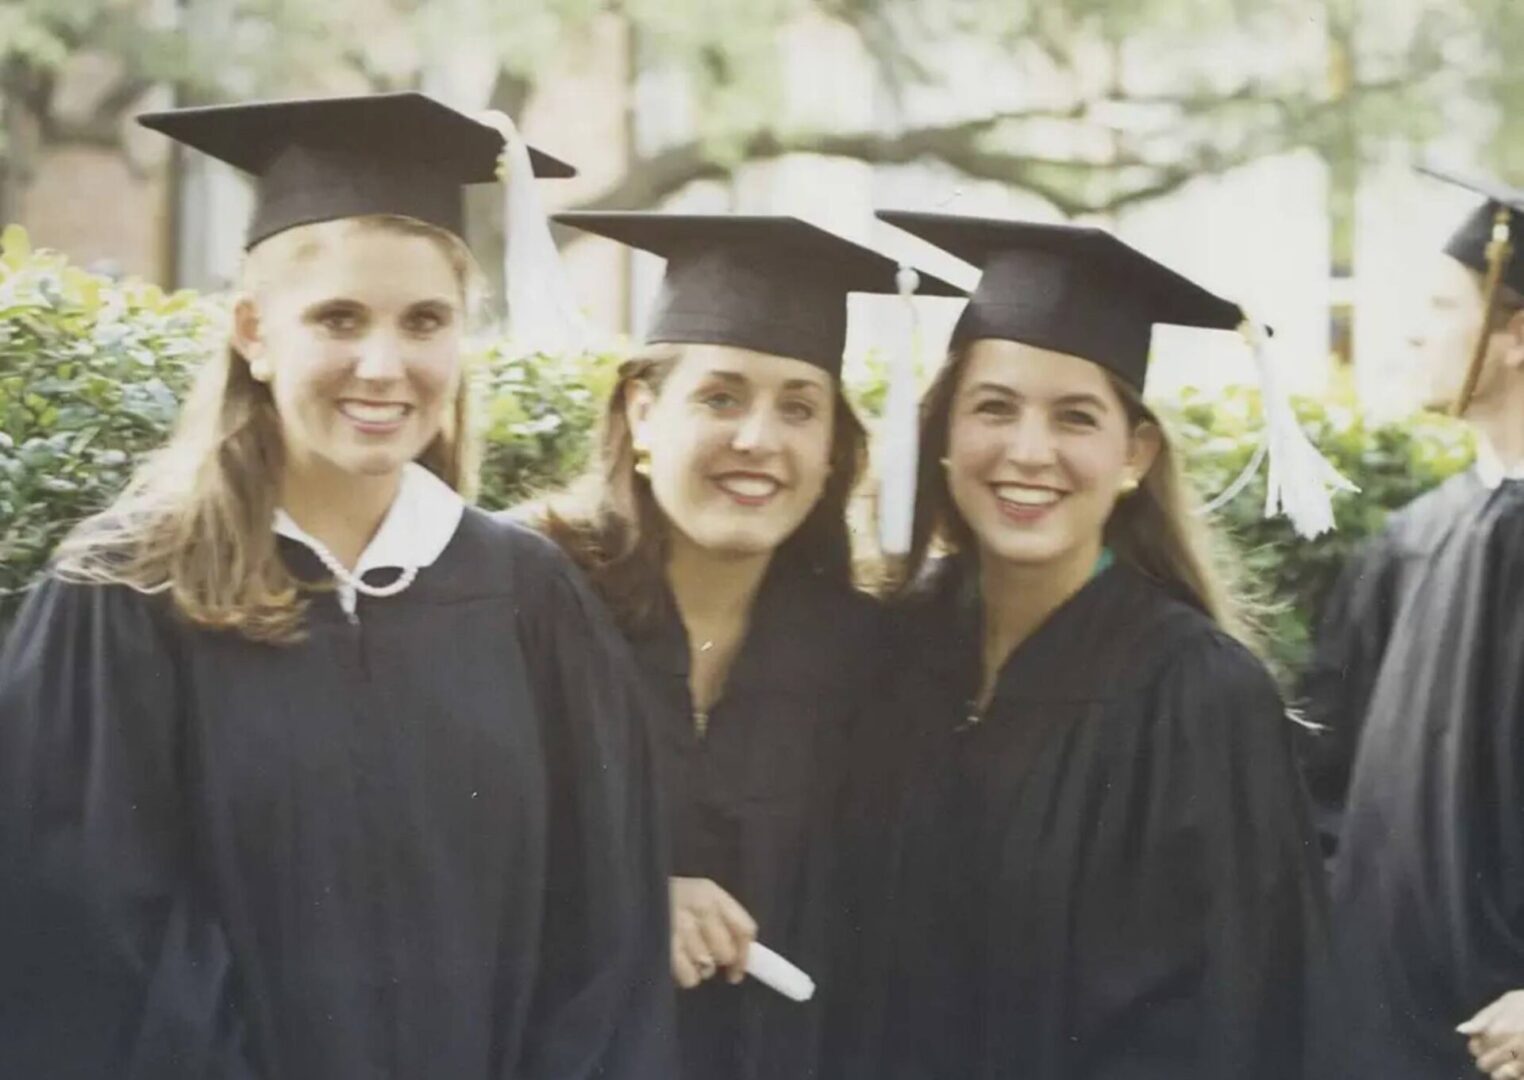 Three young women in graduation gowns and caps.